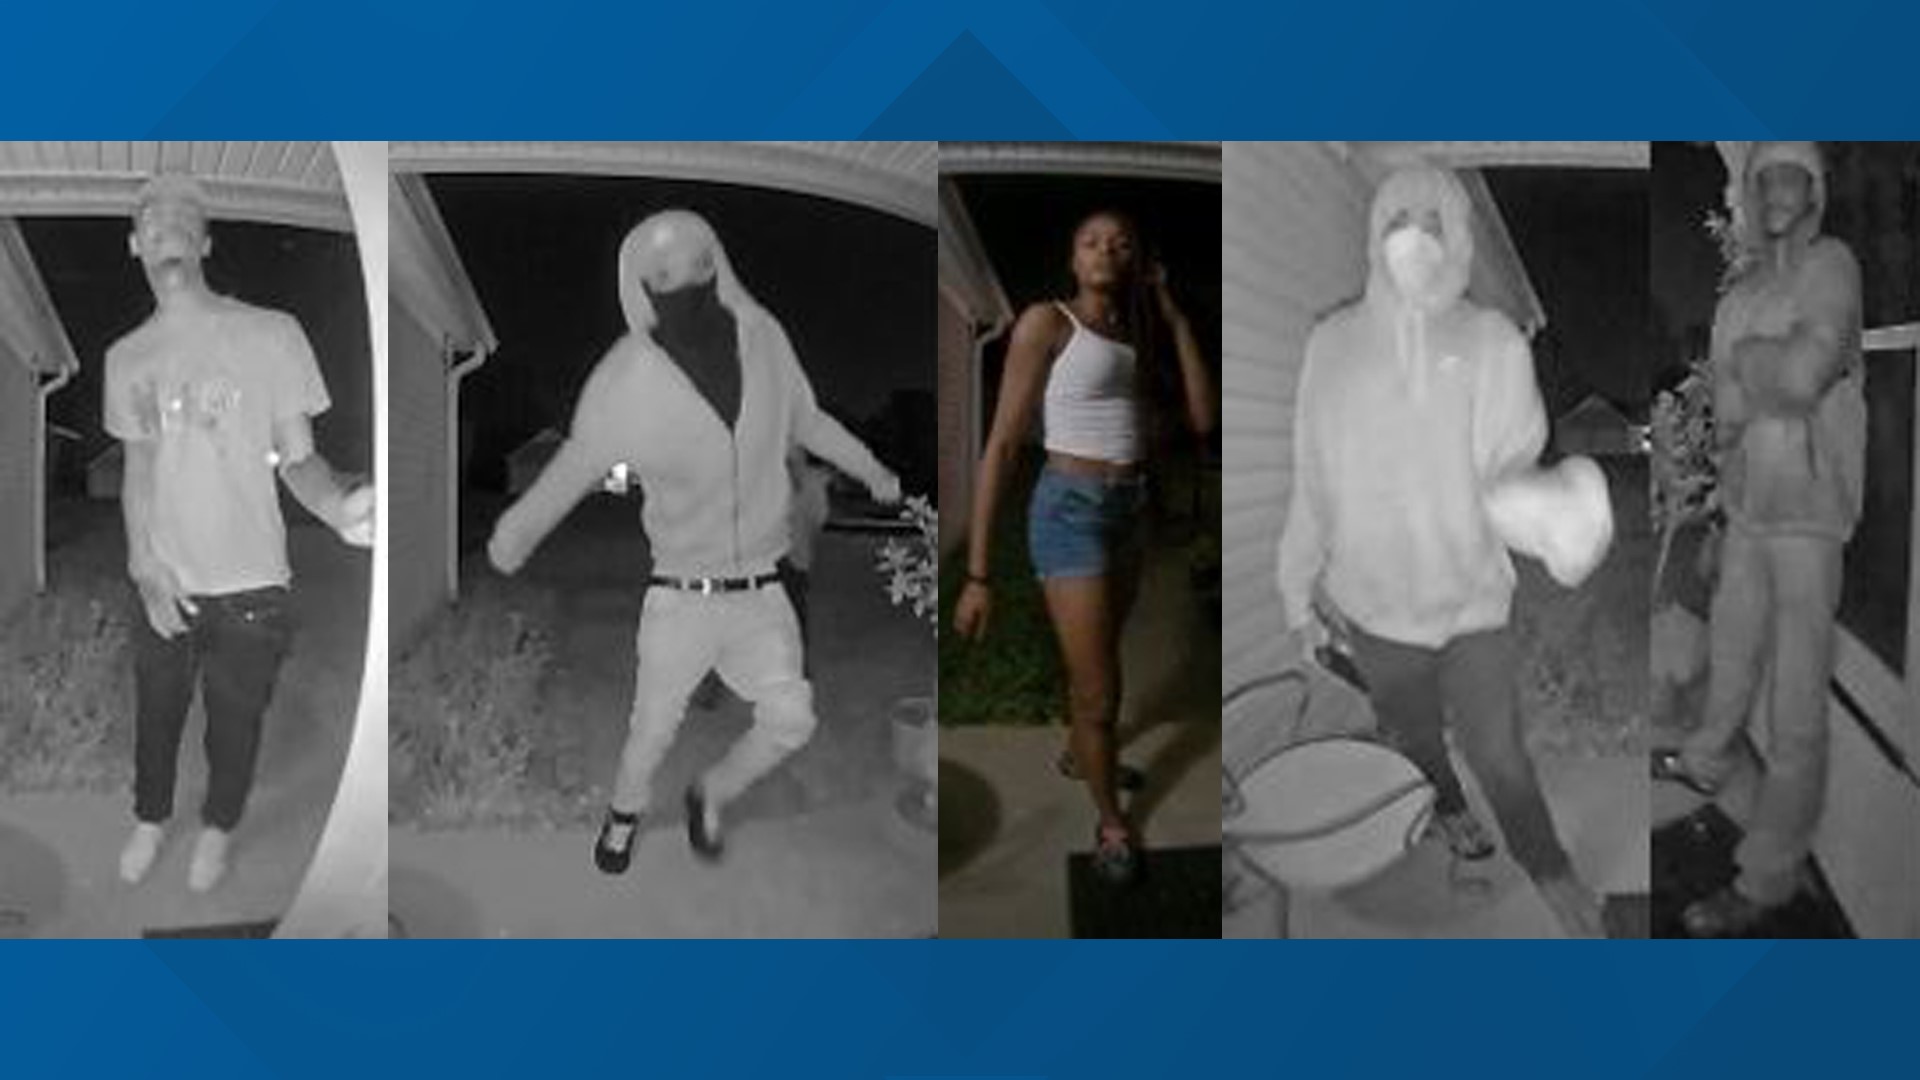 The group is accused of breaking into a home near East 91st Street and Masters Road around midnight Sept. 7.